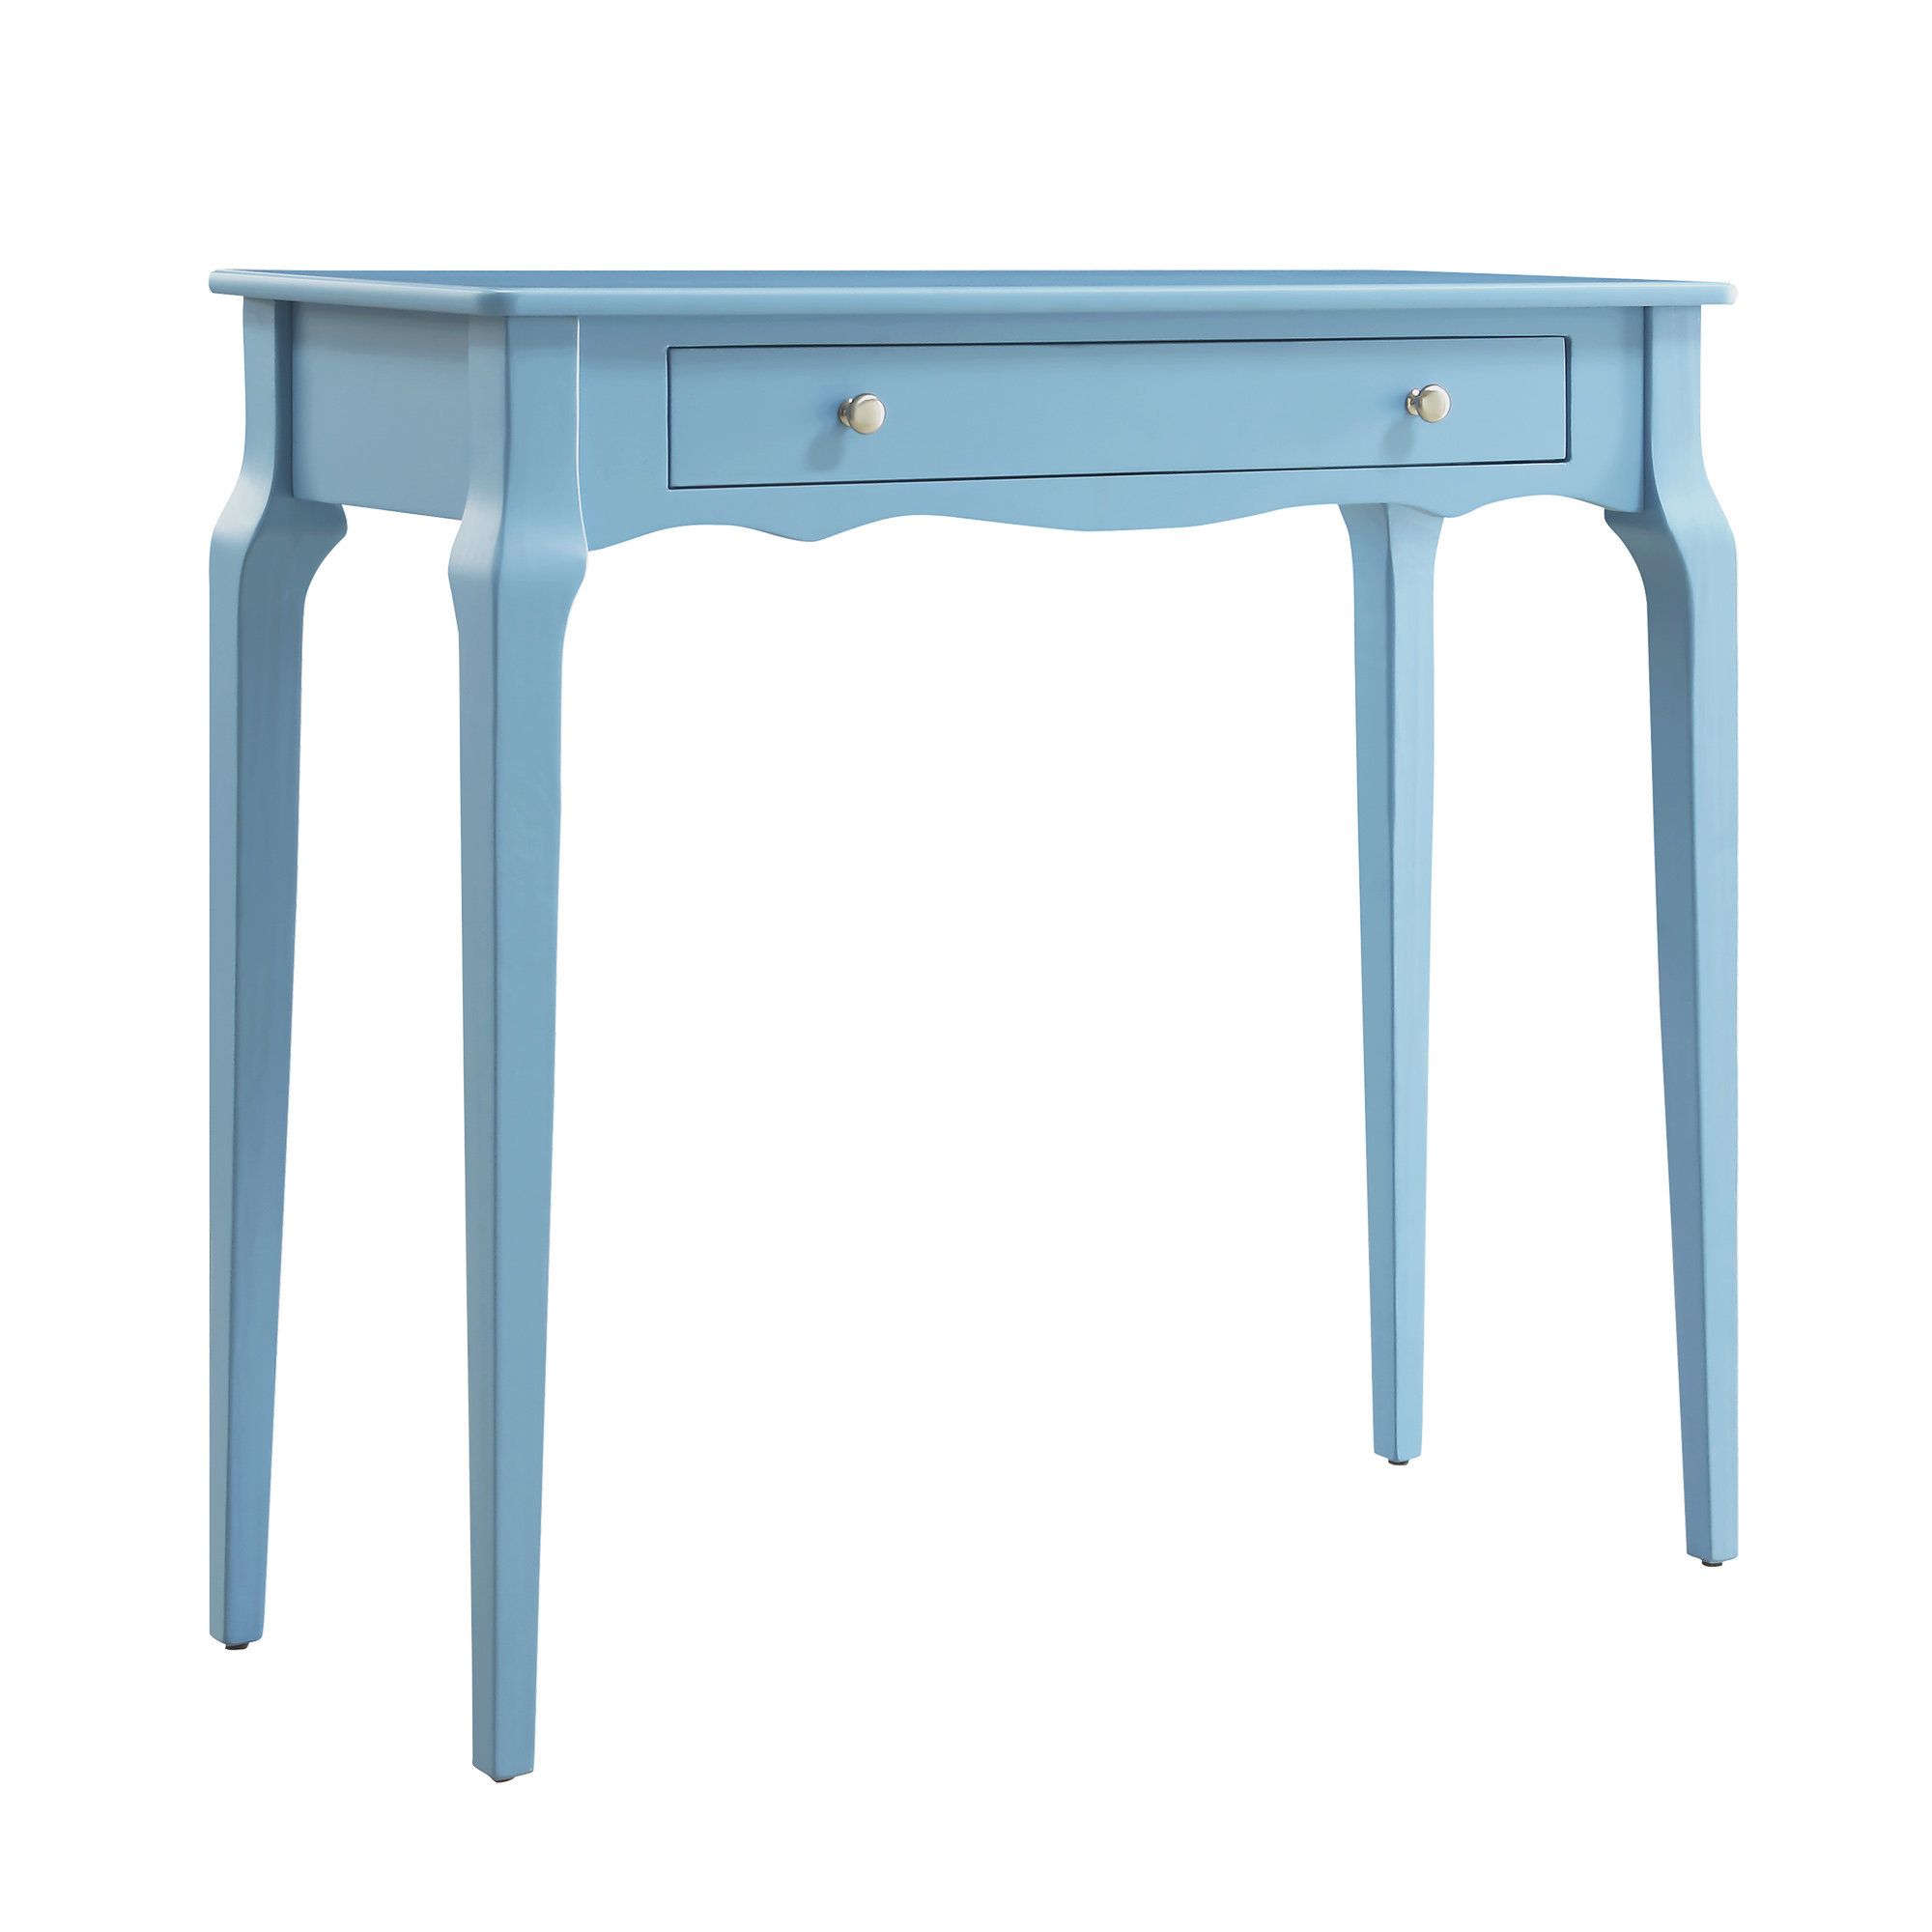 fabius console table tables consoles and modern living fretwork accent blue side cupboards for room ikea wood coffee diy sofa magazine grey geometric rug roland drum stool west